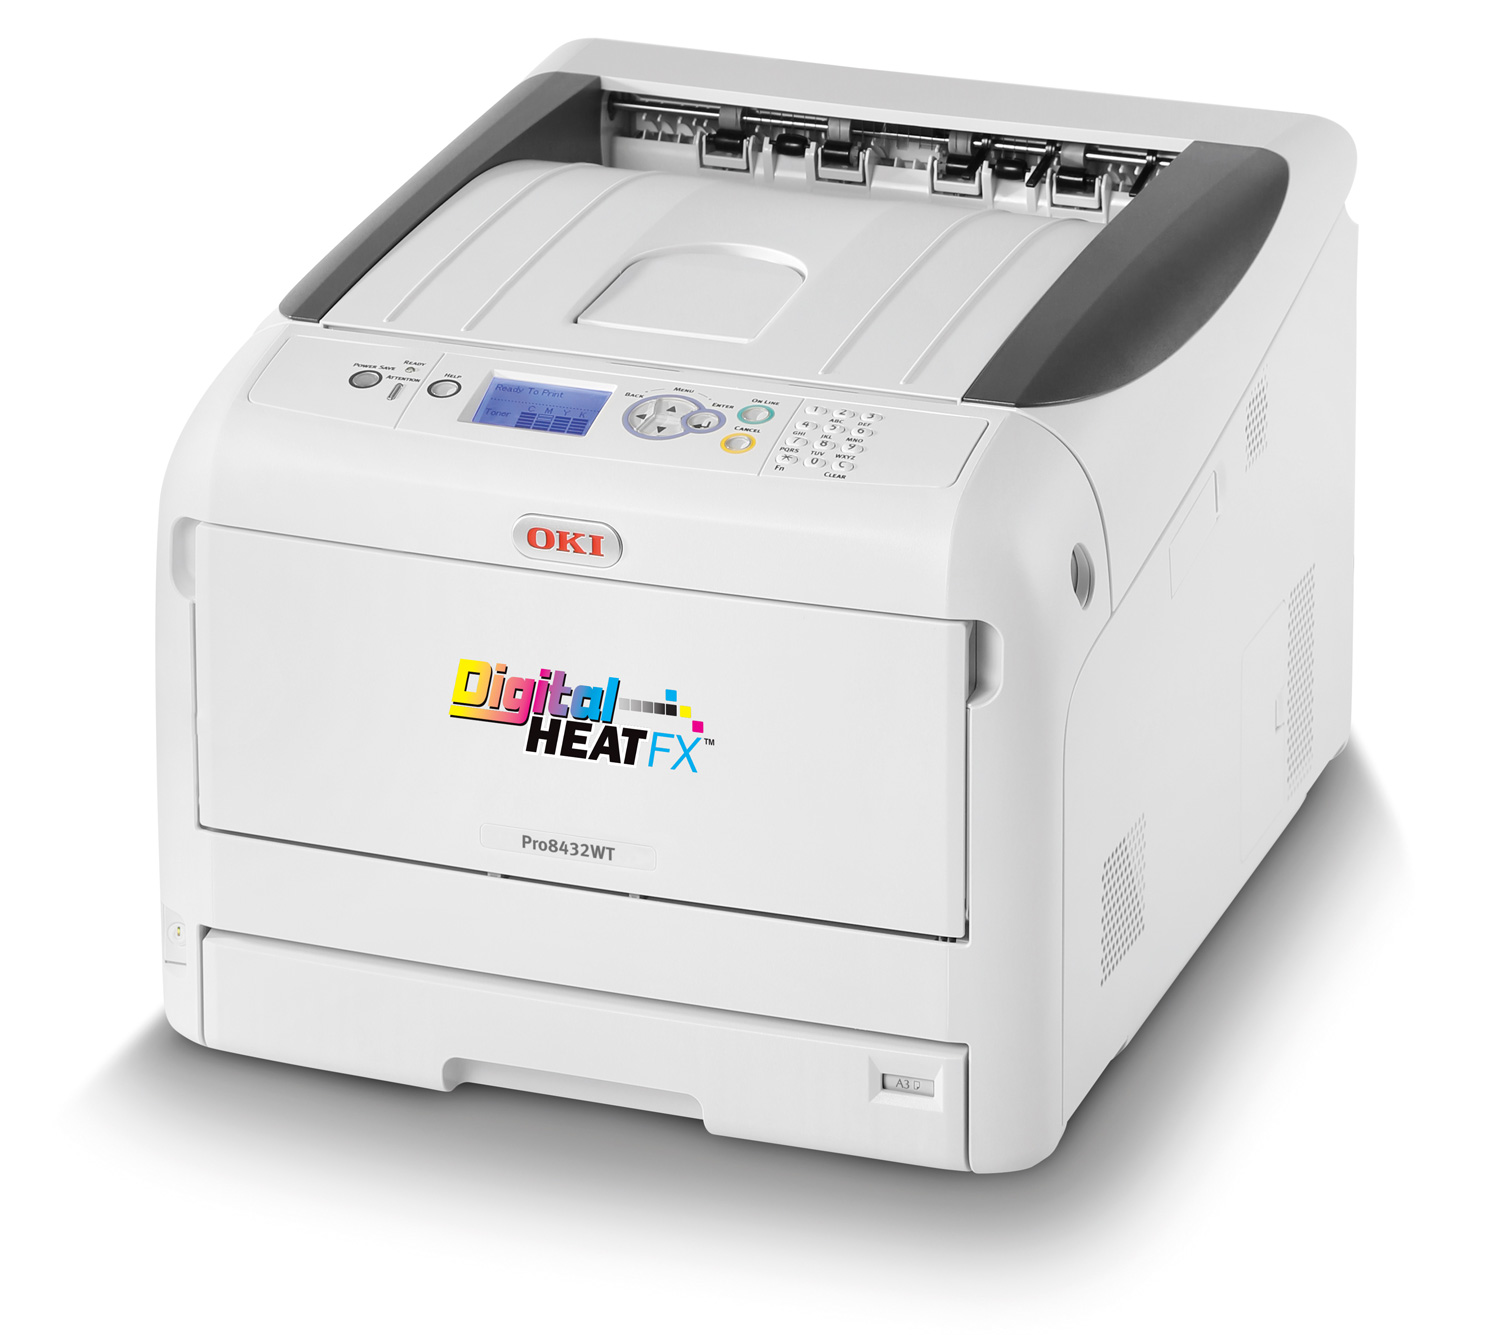 What's the biggest size it prints?